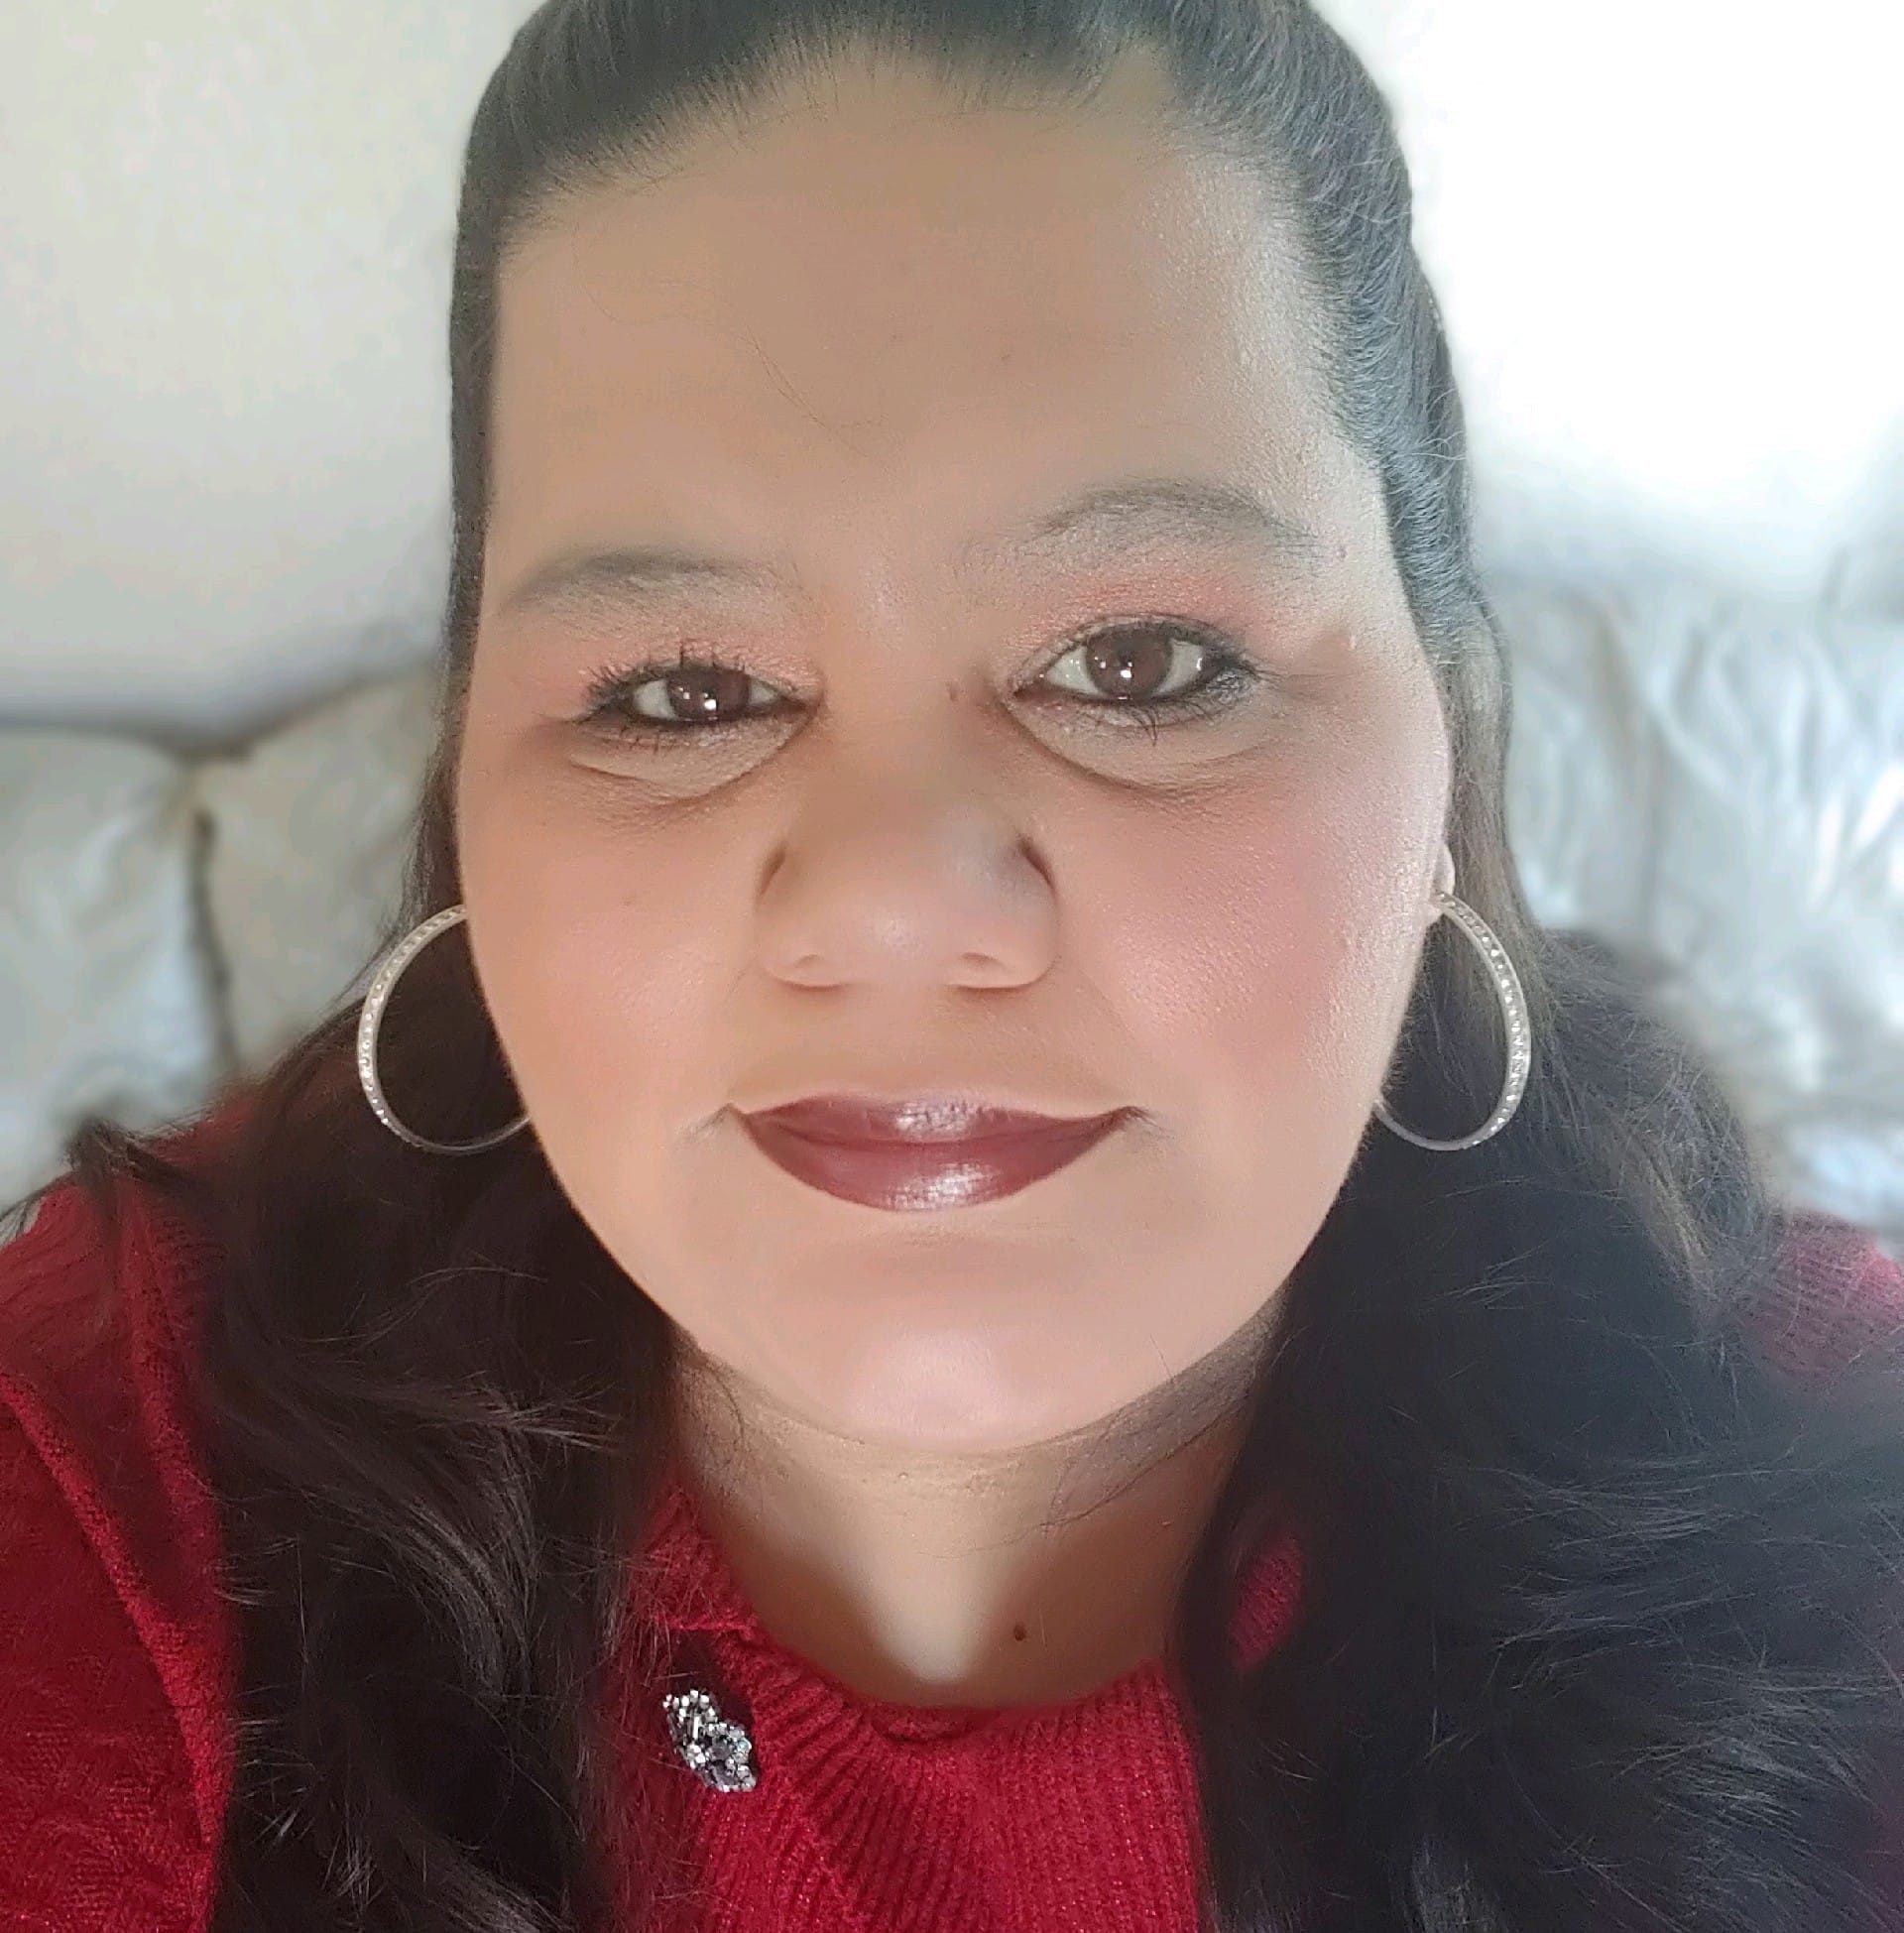 A selfie of a woman wearing a vibrant red blouse and full makeup